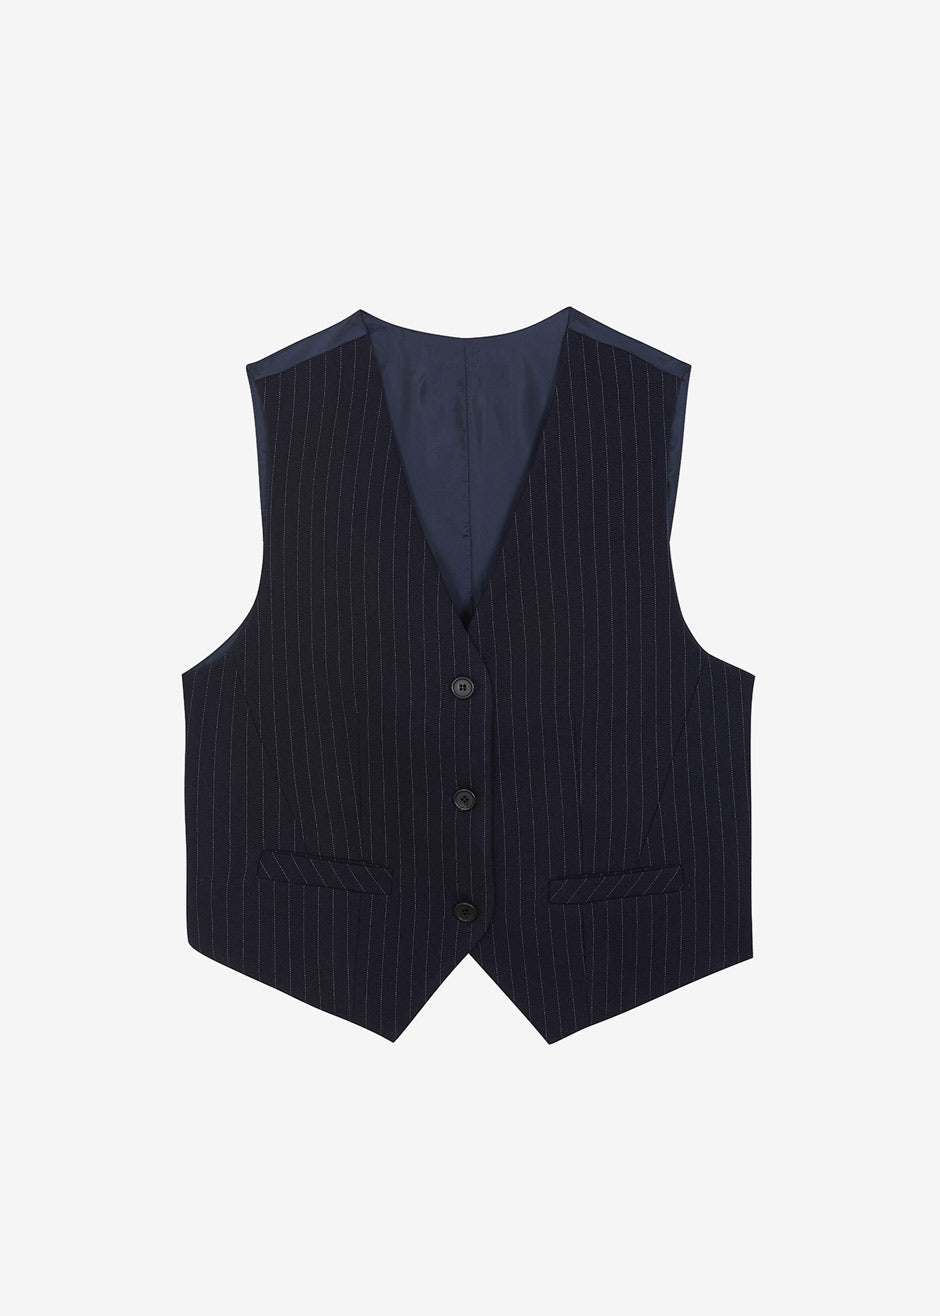 Tansy Tailored Vest - Navy Pinstripe